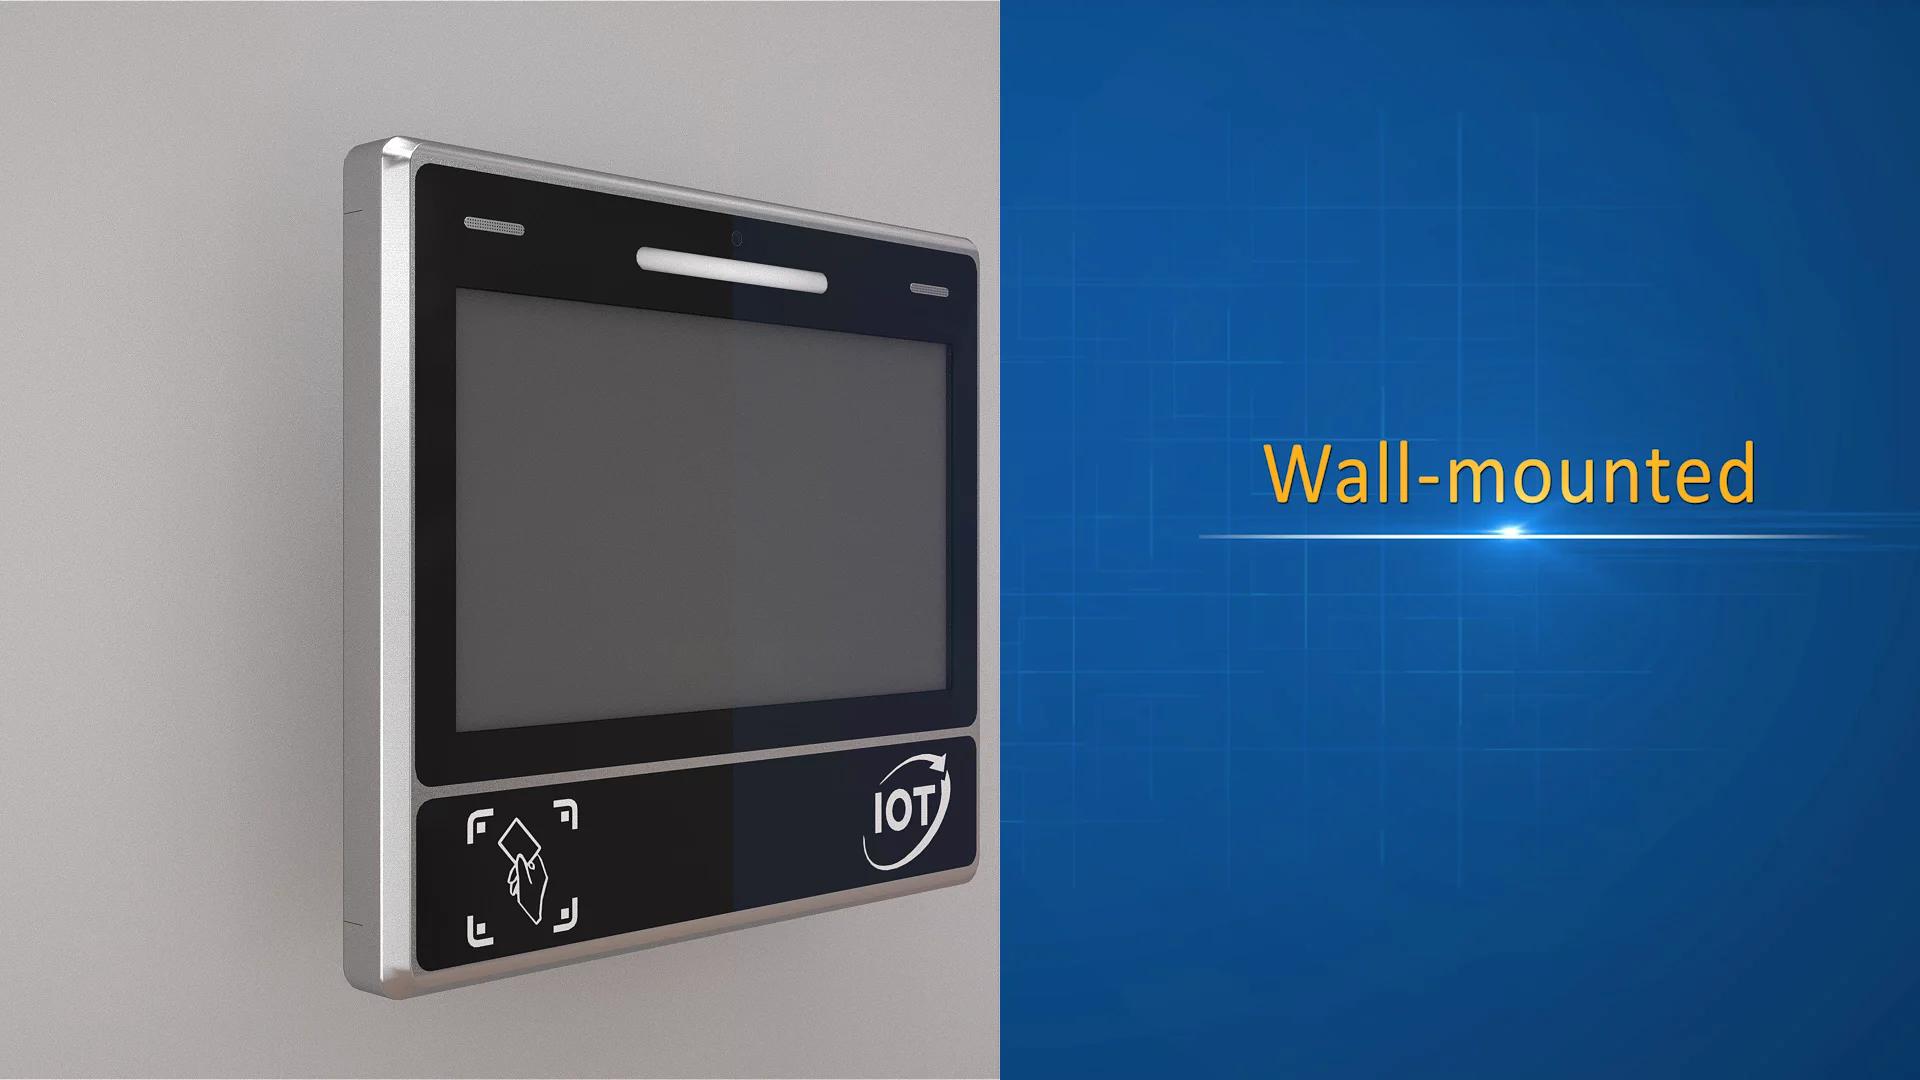 

Industrial Panel Pc Ip65 Dustproof Waterproof 11.6 Inch Android 7.1 Industrial Touch Screen Panel Pc With Led Warning Light